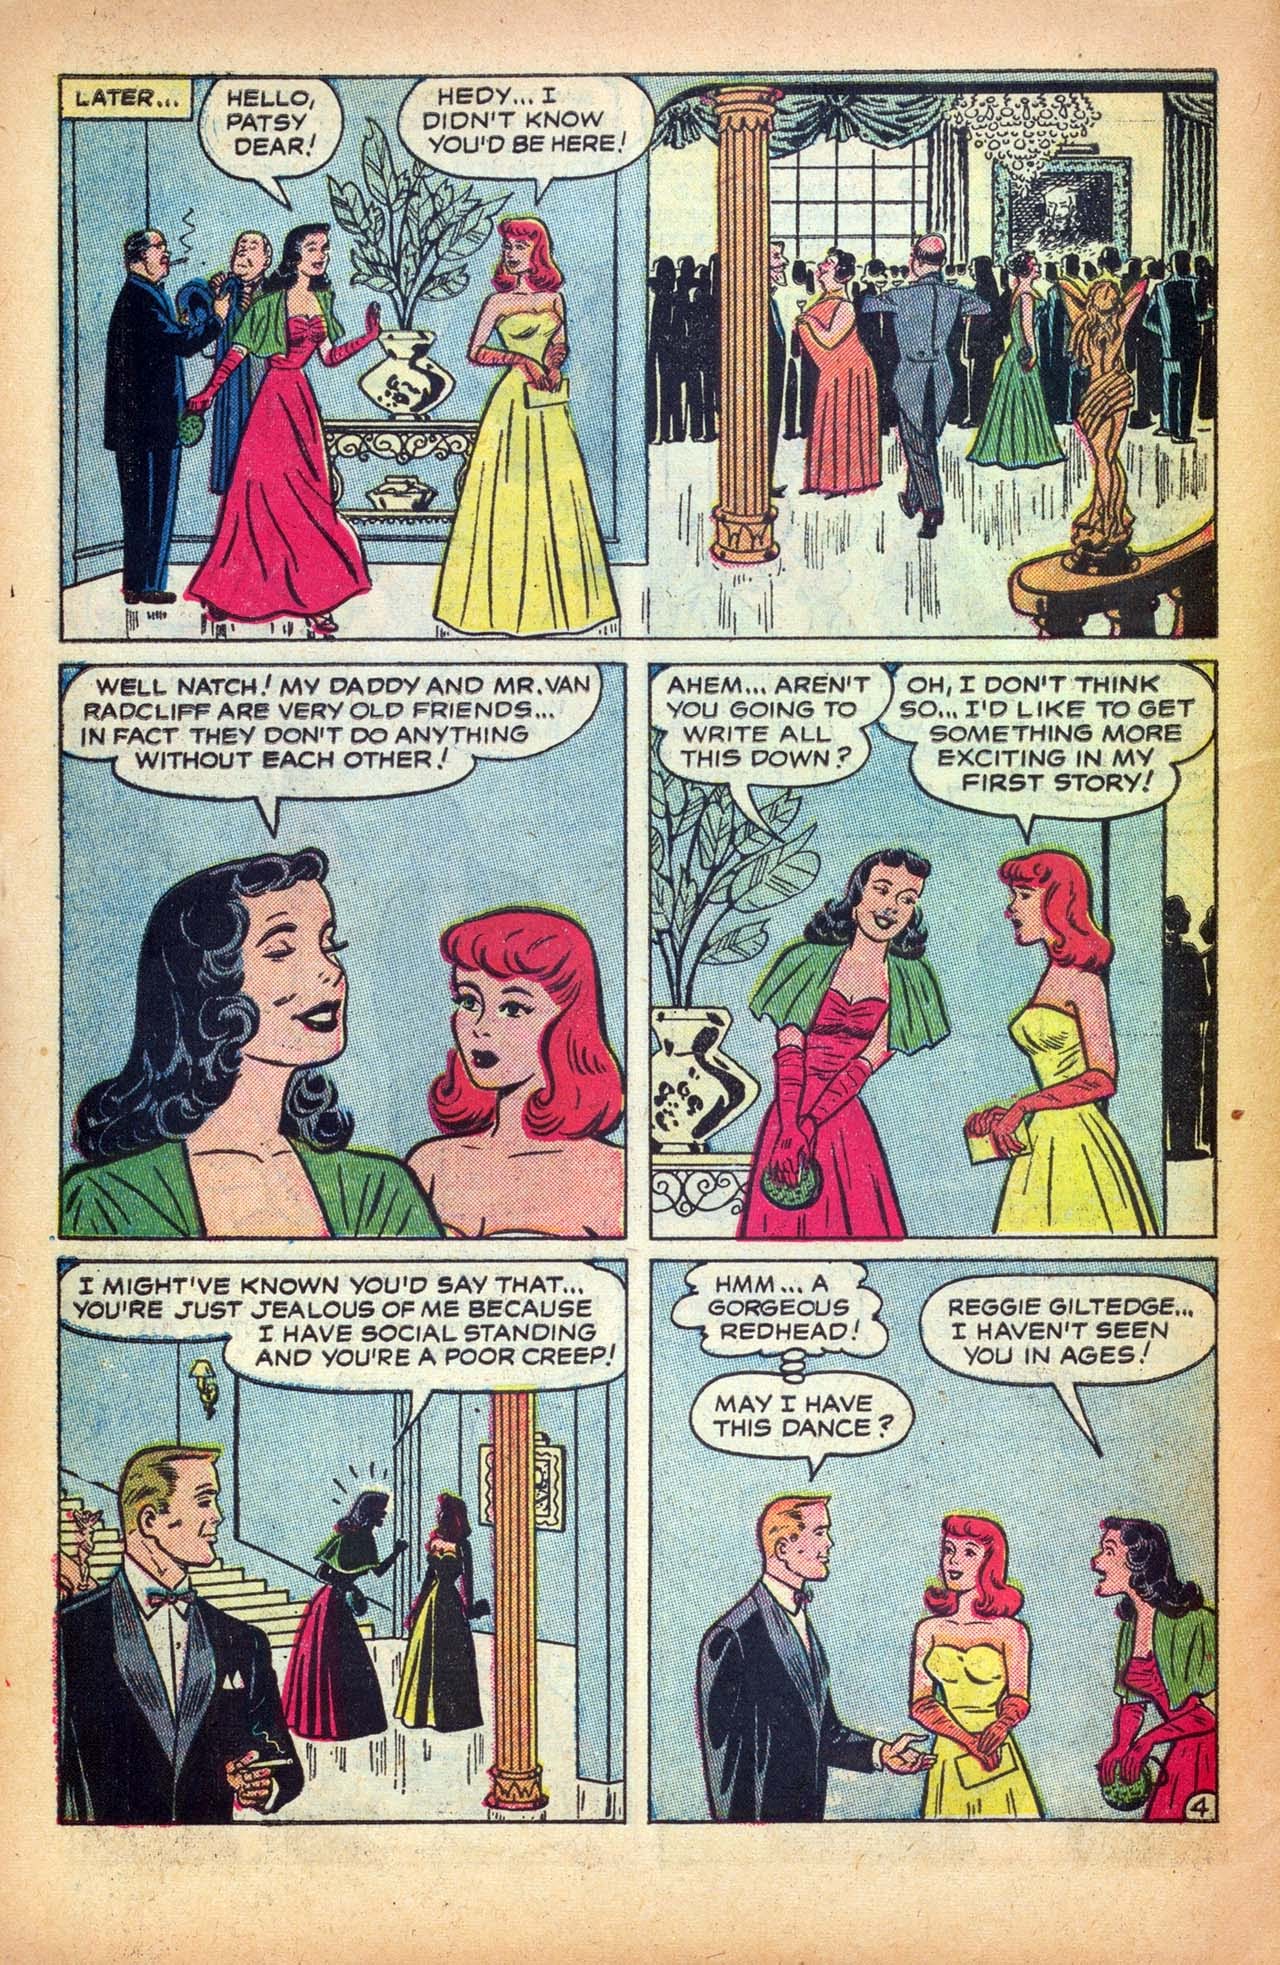 Read online Patsy and Hedy comic -  Issue #28 - 6